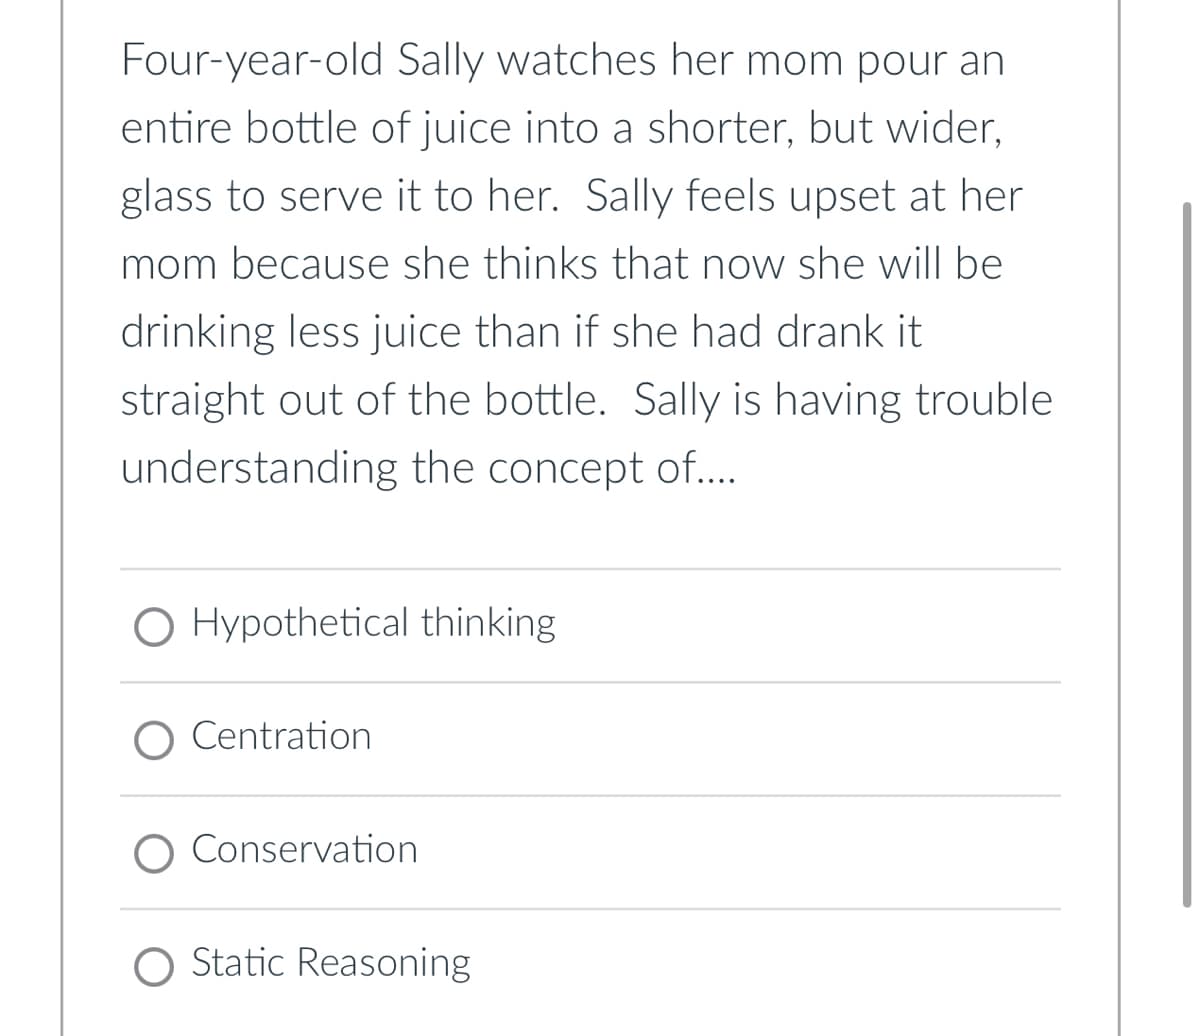 Four-year-old Sally watches her mom pour an
entire bottle of juice into a shorter, but wider,
glass to serve it to her. Sally feels upset at her
mom because she thinks that now she will be
drinking less juice than if she had drank it
straight out of the bottle. Sally is having trouble
understanding the concept of....
O Hypothetical thinking
Centration
O Conservation
O Static Reasoning